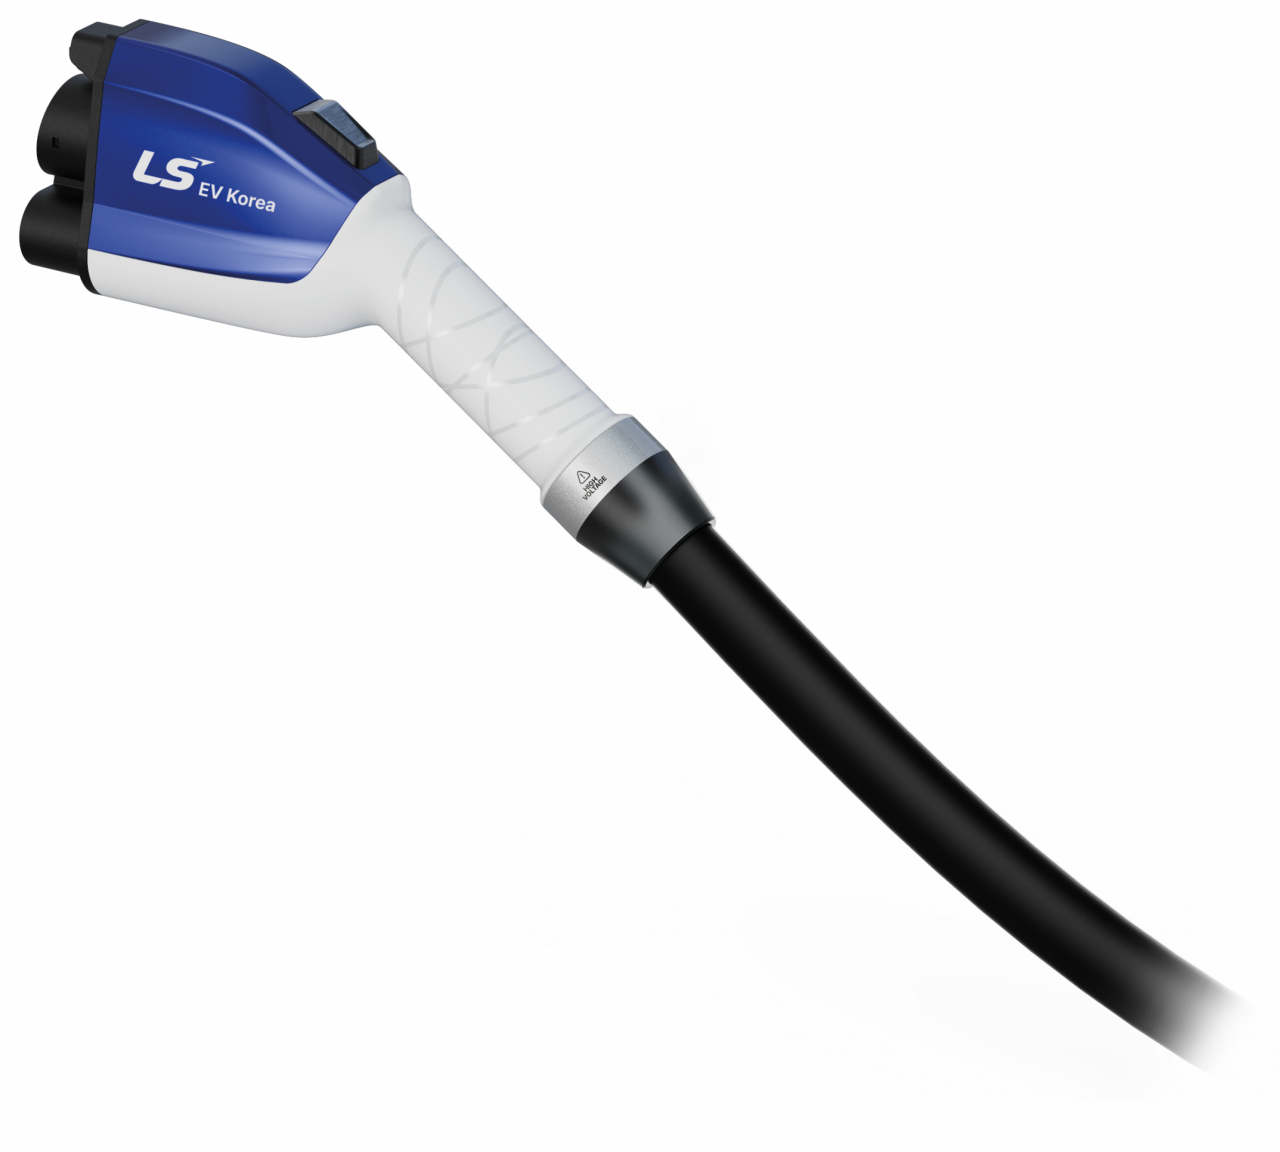 LS Cable & System's new rapid liquid cooling EV charging cable (LS Cable & System)